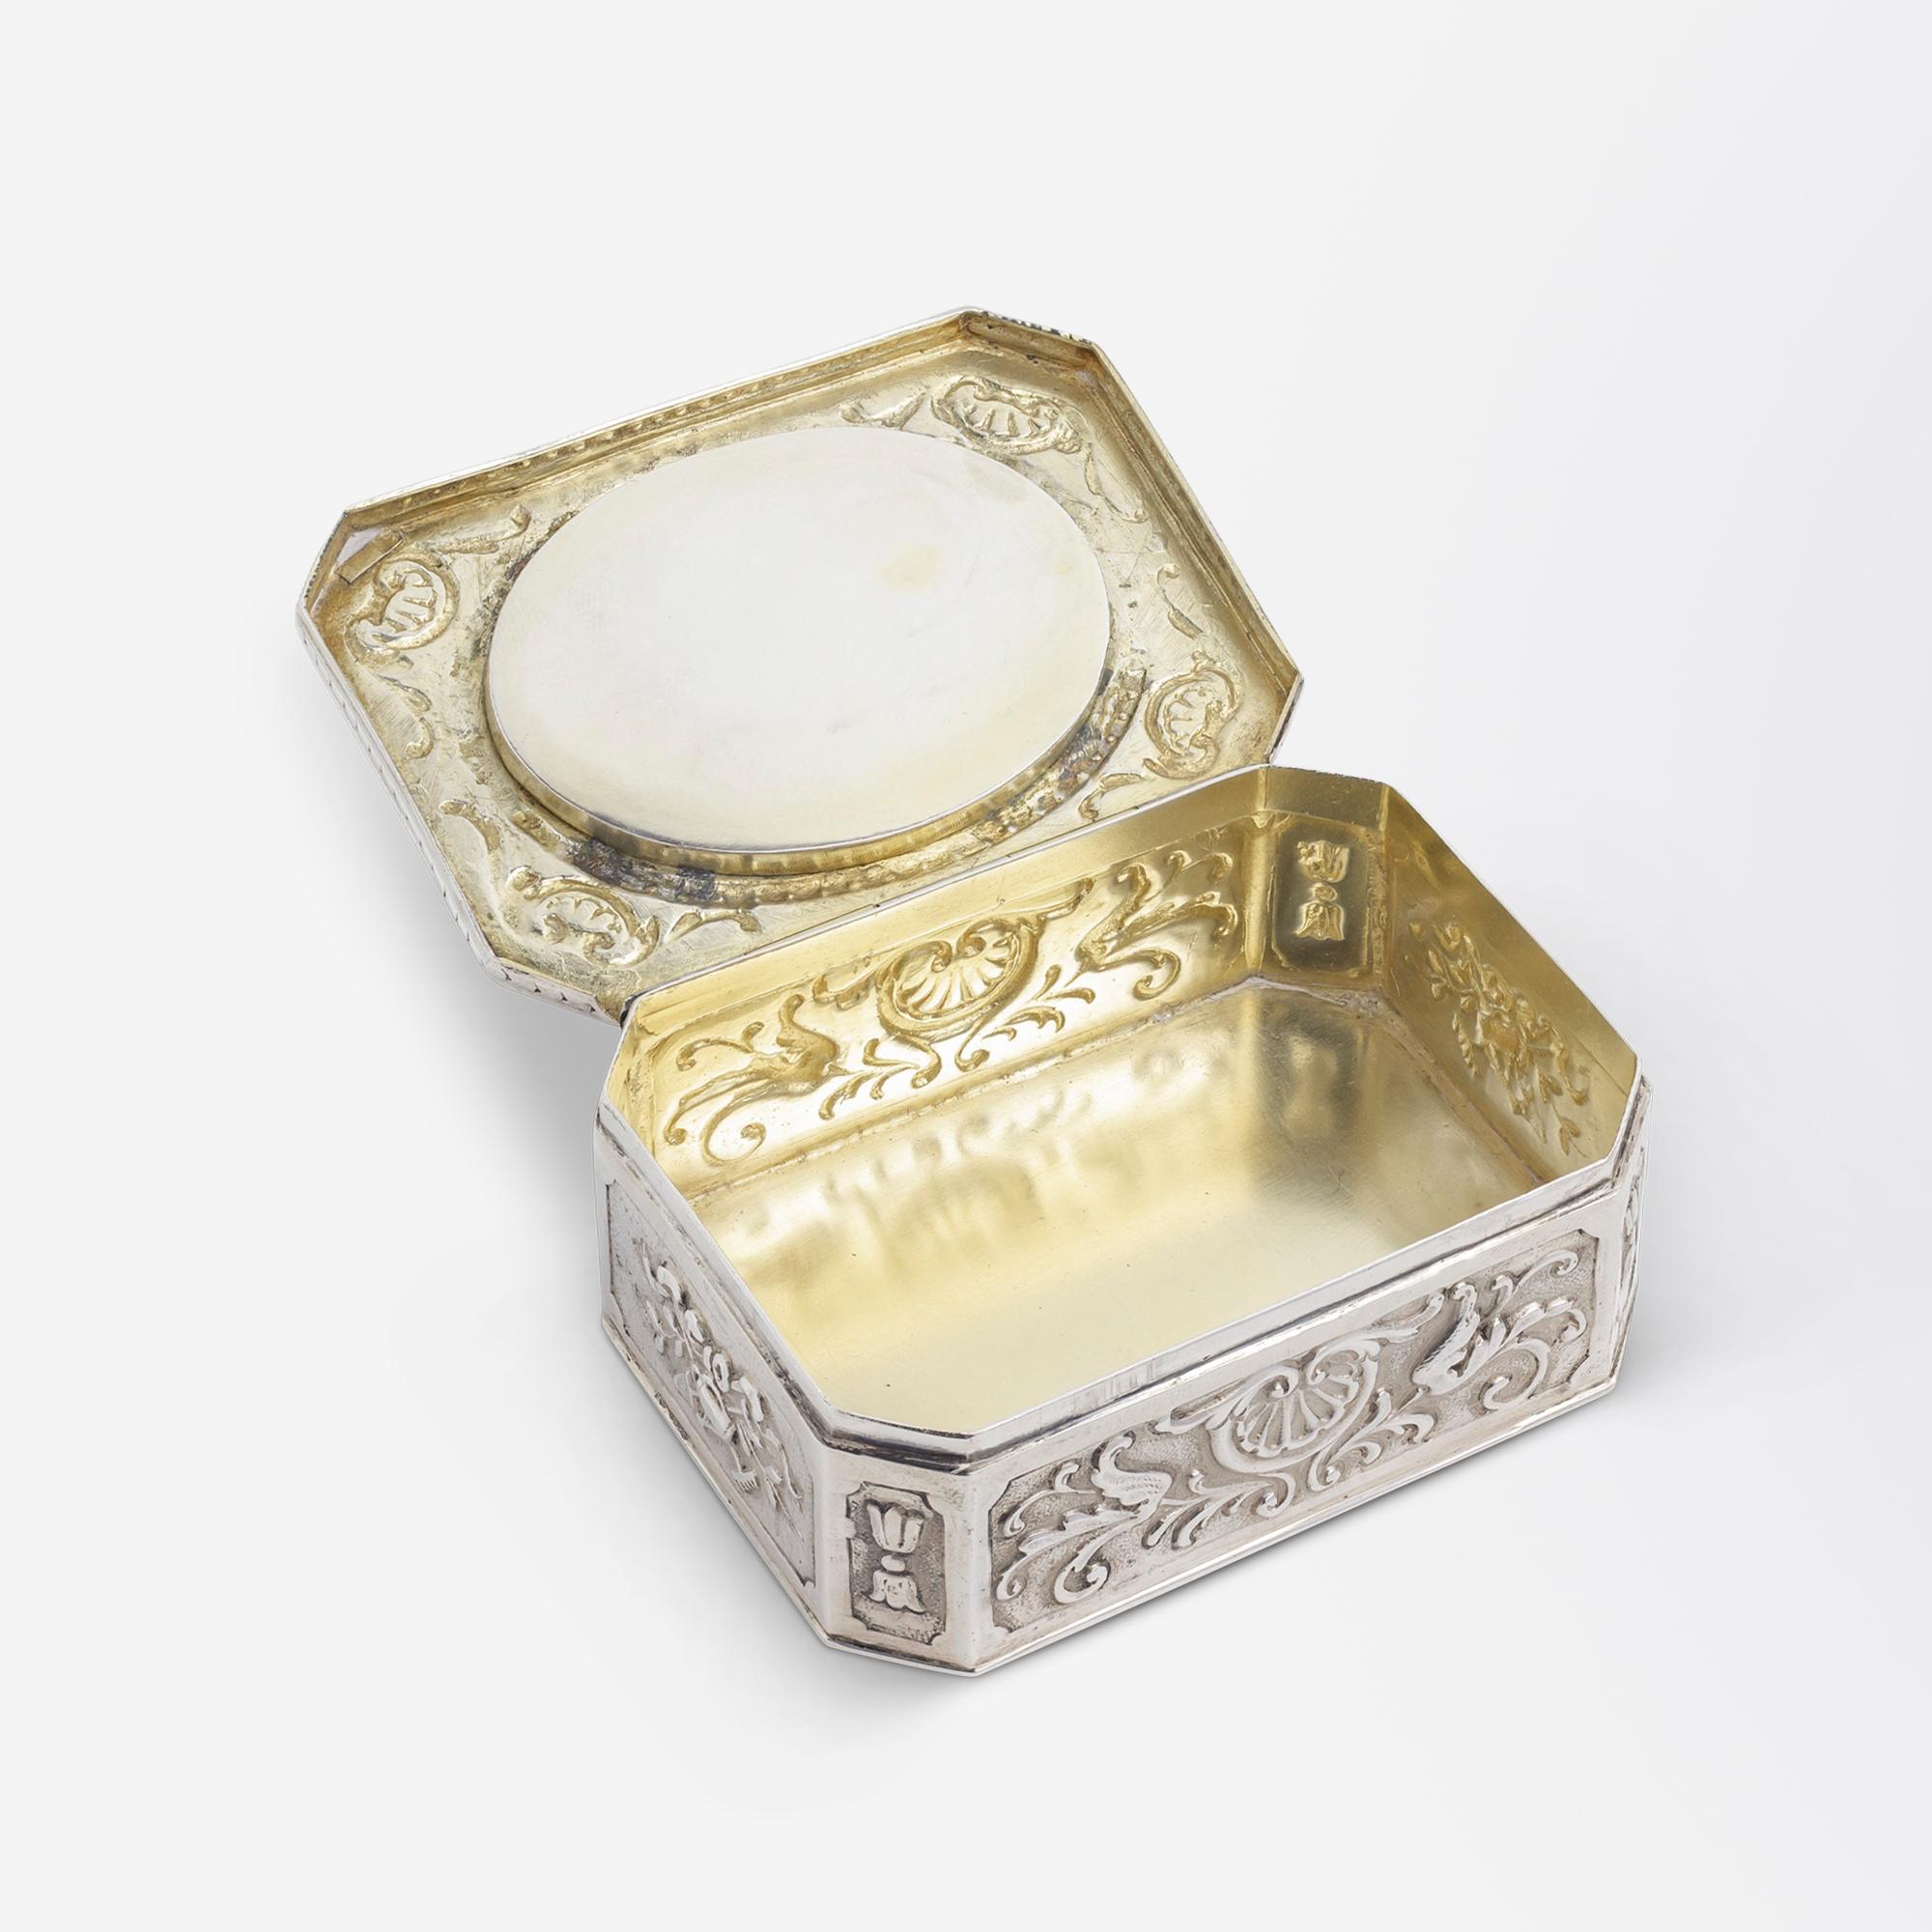 This charming box dates to the Turn of The Century and has been crafted from 800 purity silver and decorated with enamels. The piece originates in Germany, is octagonal in shape and has been crafted with ornate repousse detailing. To the centre of